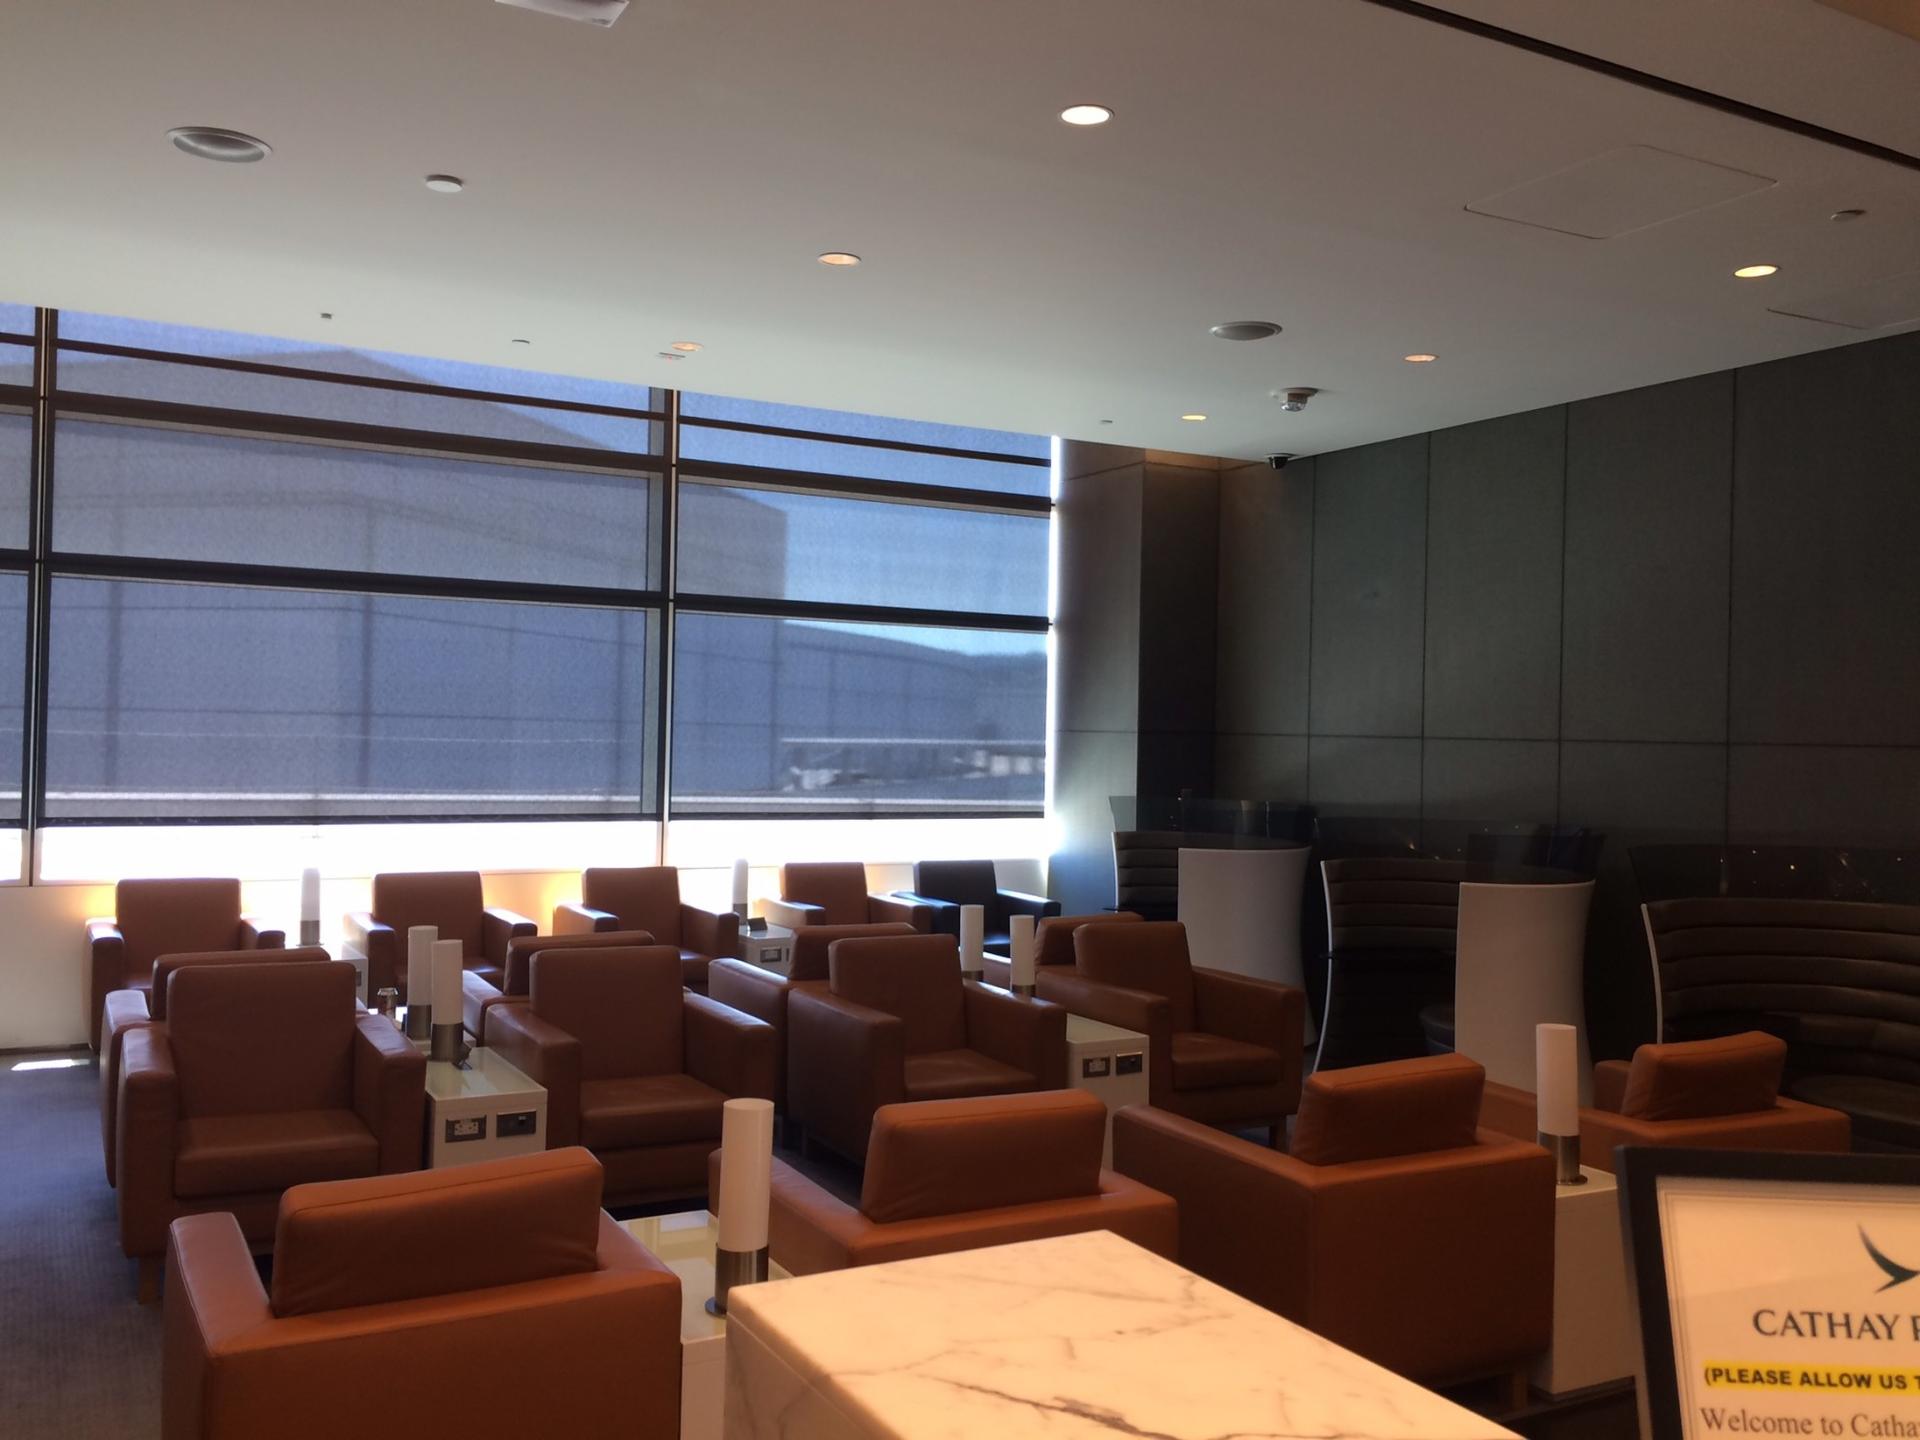 Cathay Pacific First and Business Class Lounge image 63 of 74